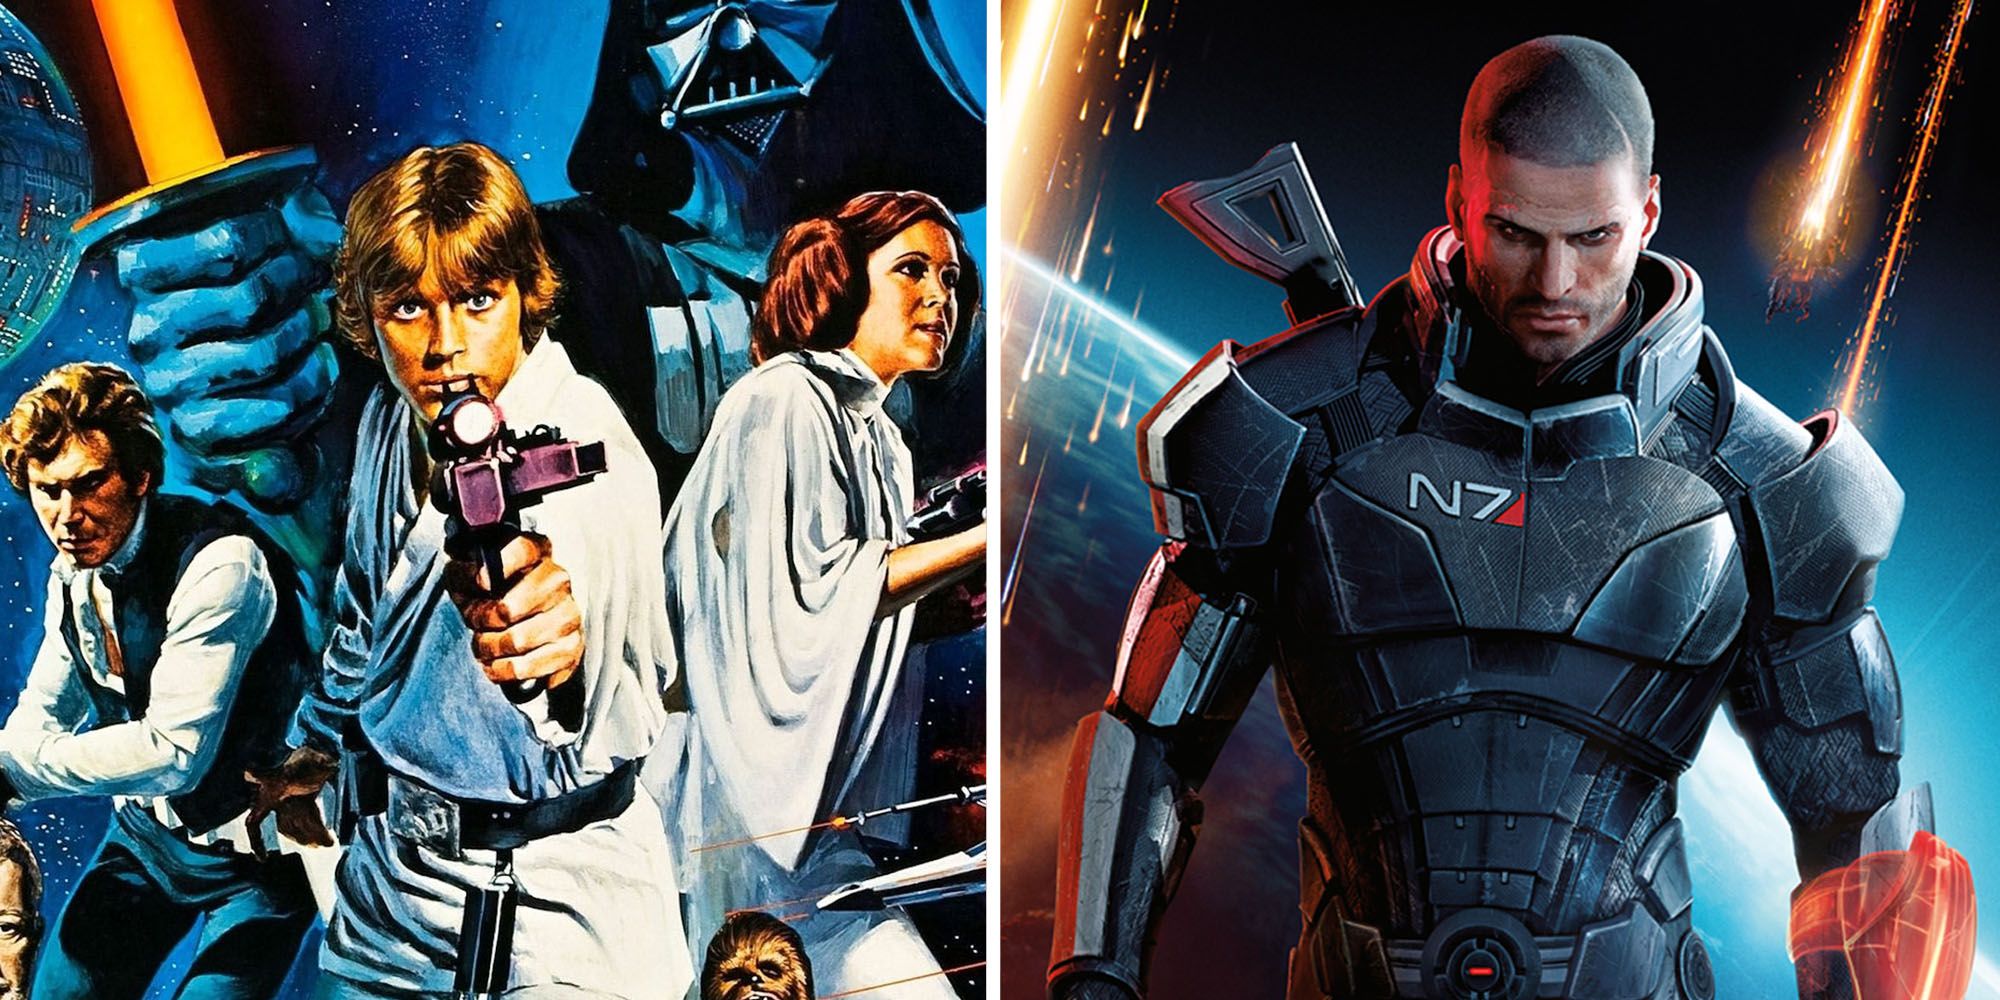 Star Wars poster and Commander Shepard in Mass Effect